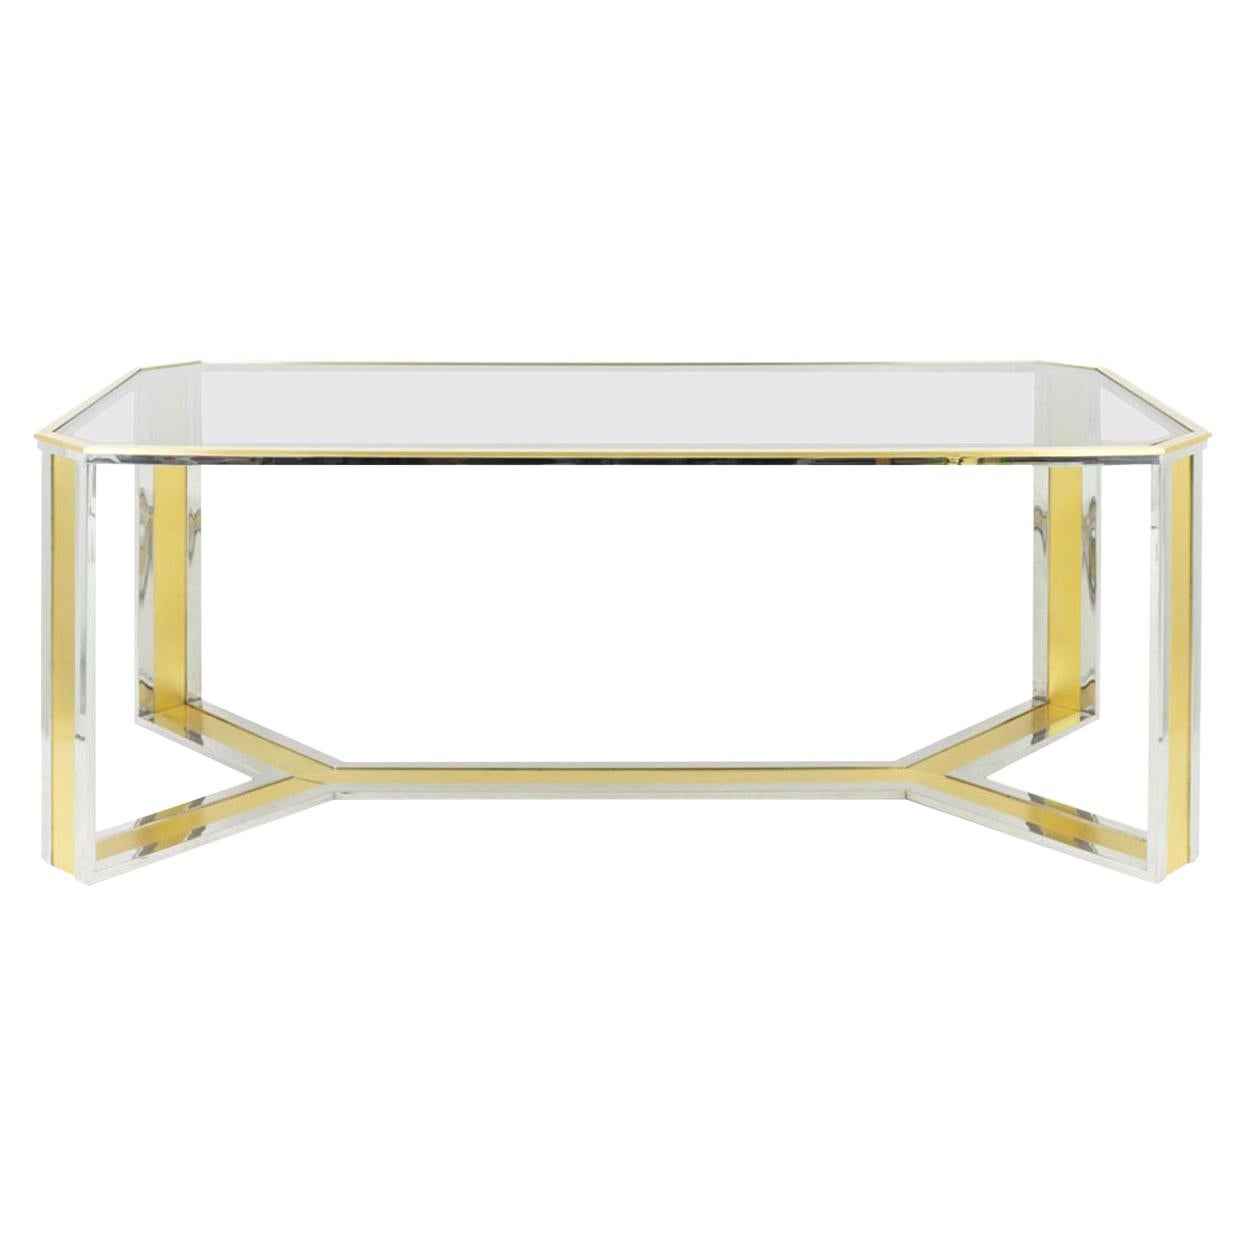 Romeo Rega Style Table in Chromed and Gilt Brass, Smoked Glass, 1970s